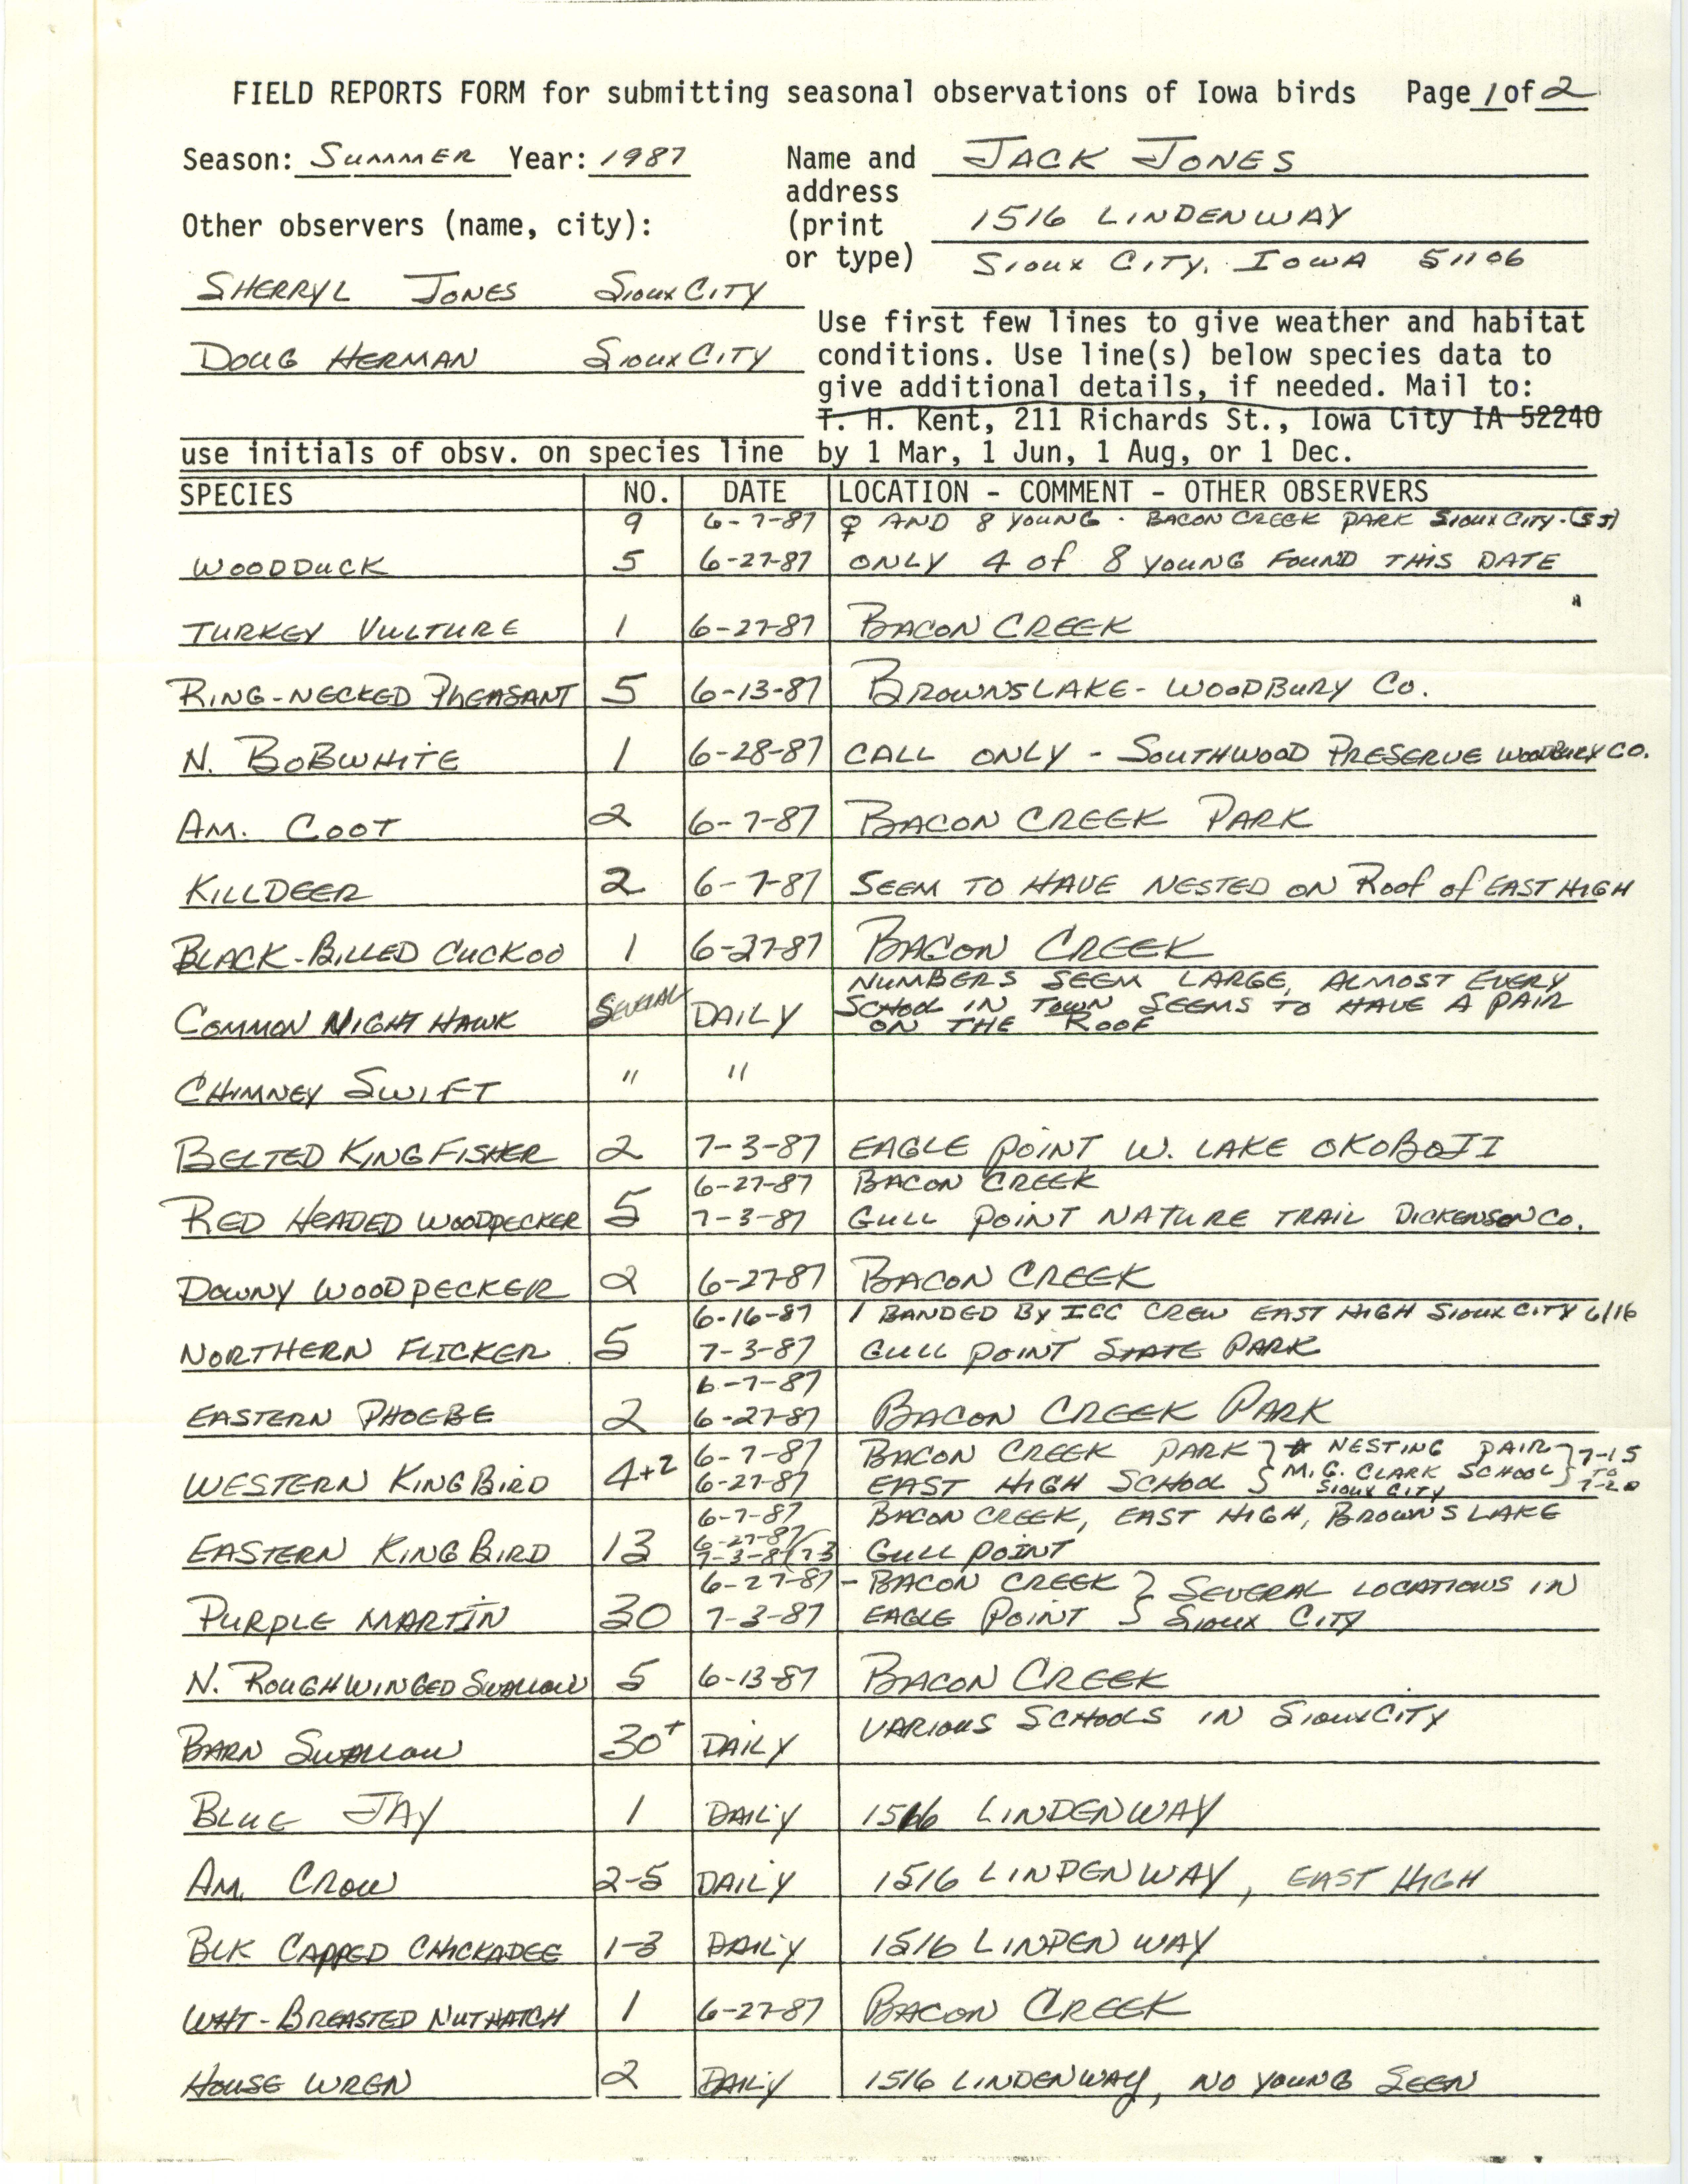 Field reports form for submitting seasonal observations of Iowa birds, Jack Jones, summer 1987